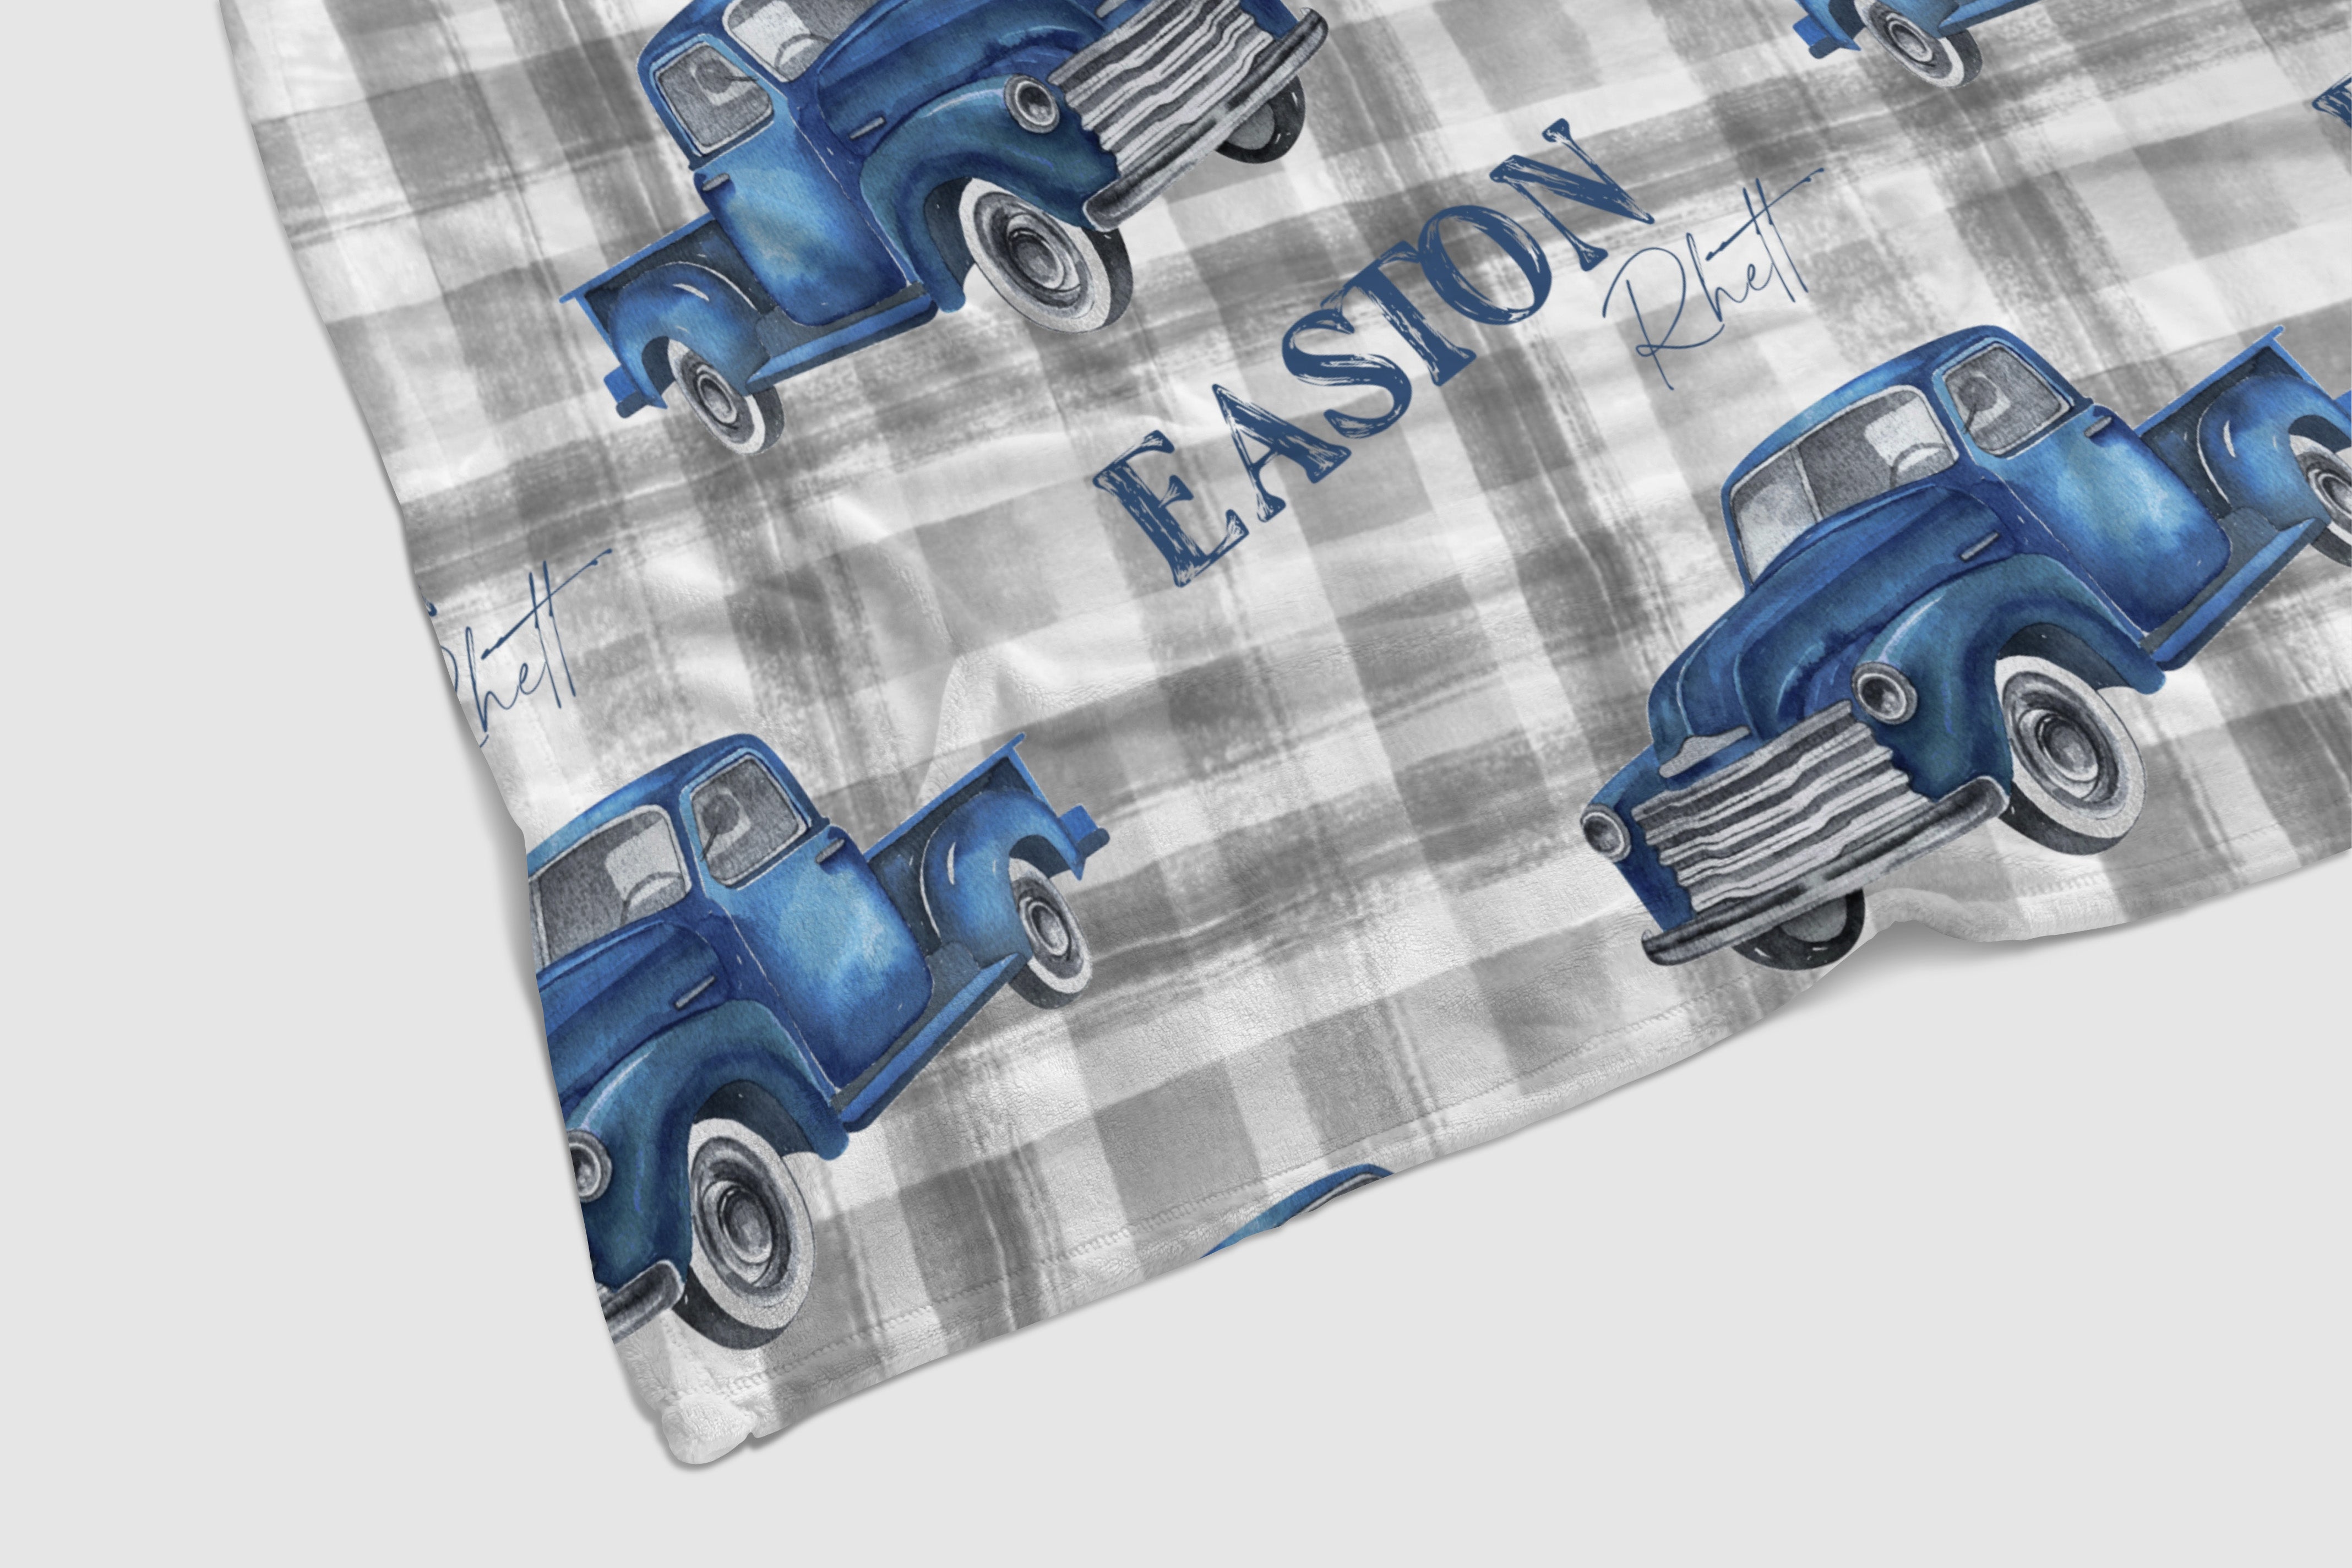 Vintage Truck Personalized Baby Blanket - gender_boy, Personalized_Yes, text